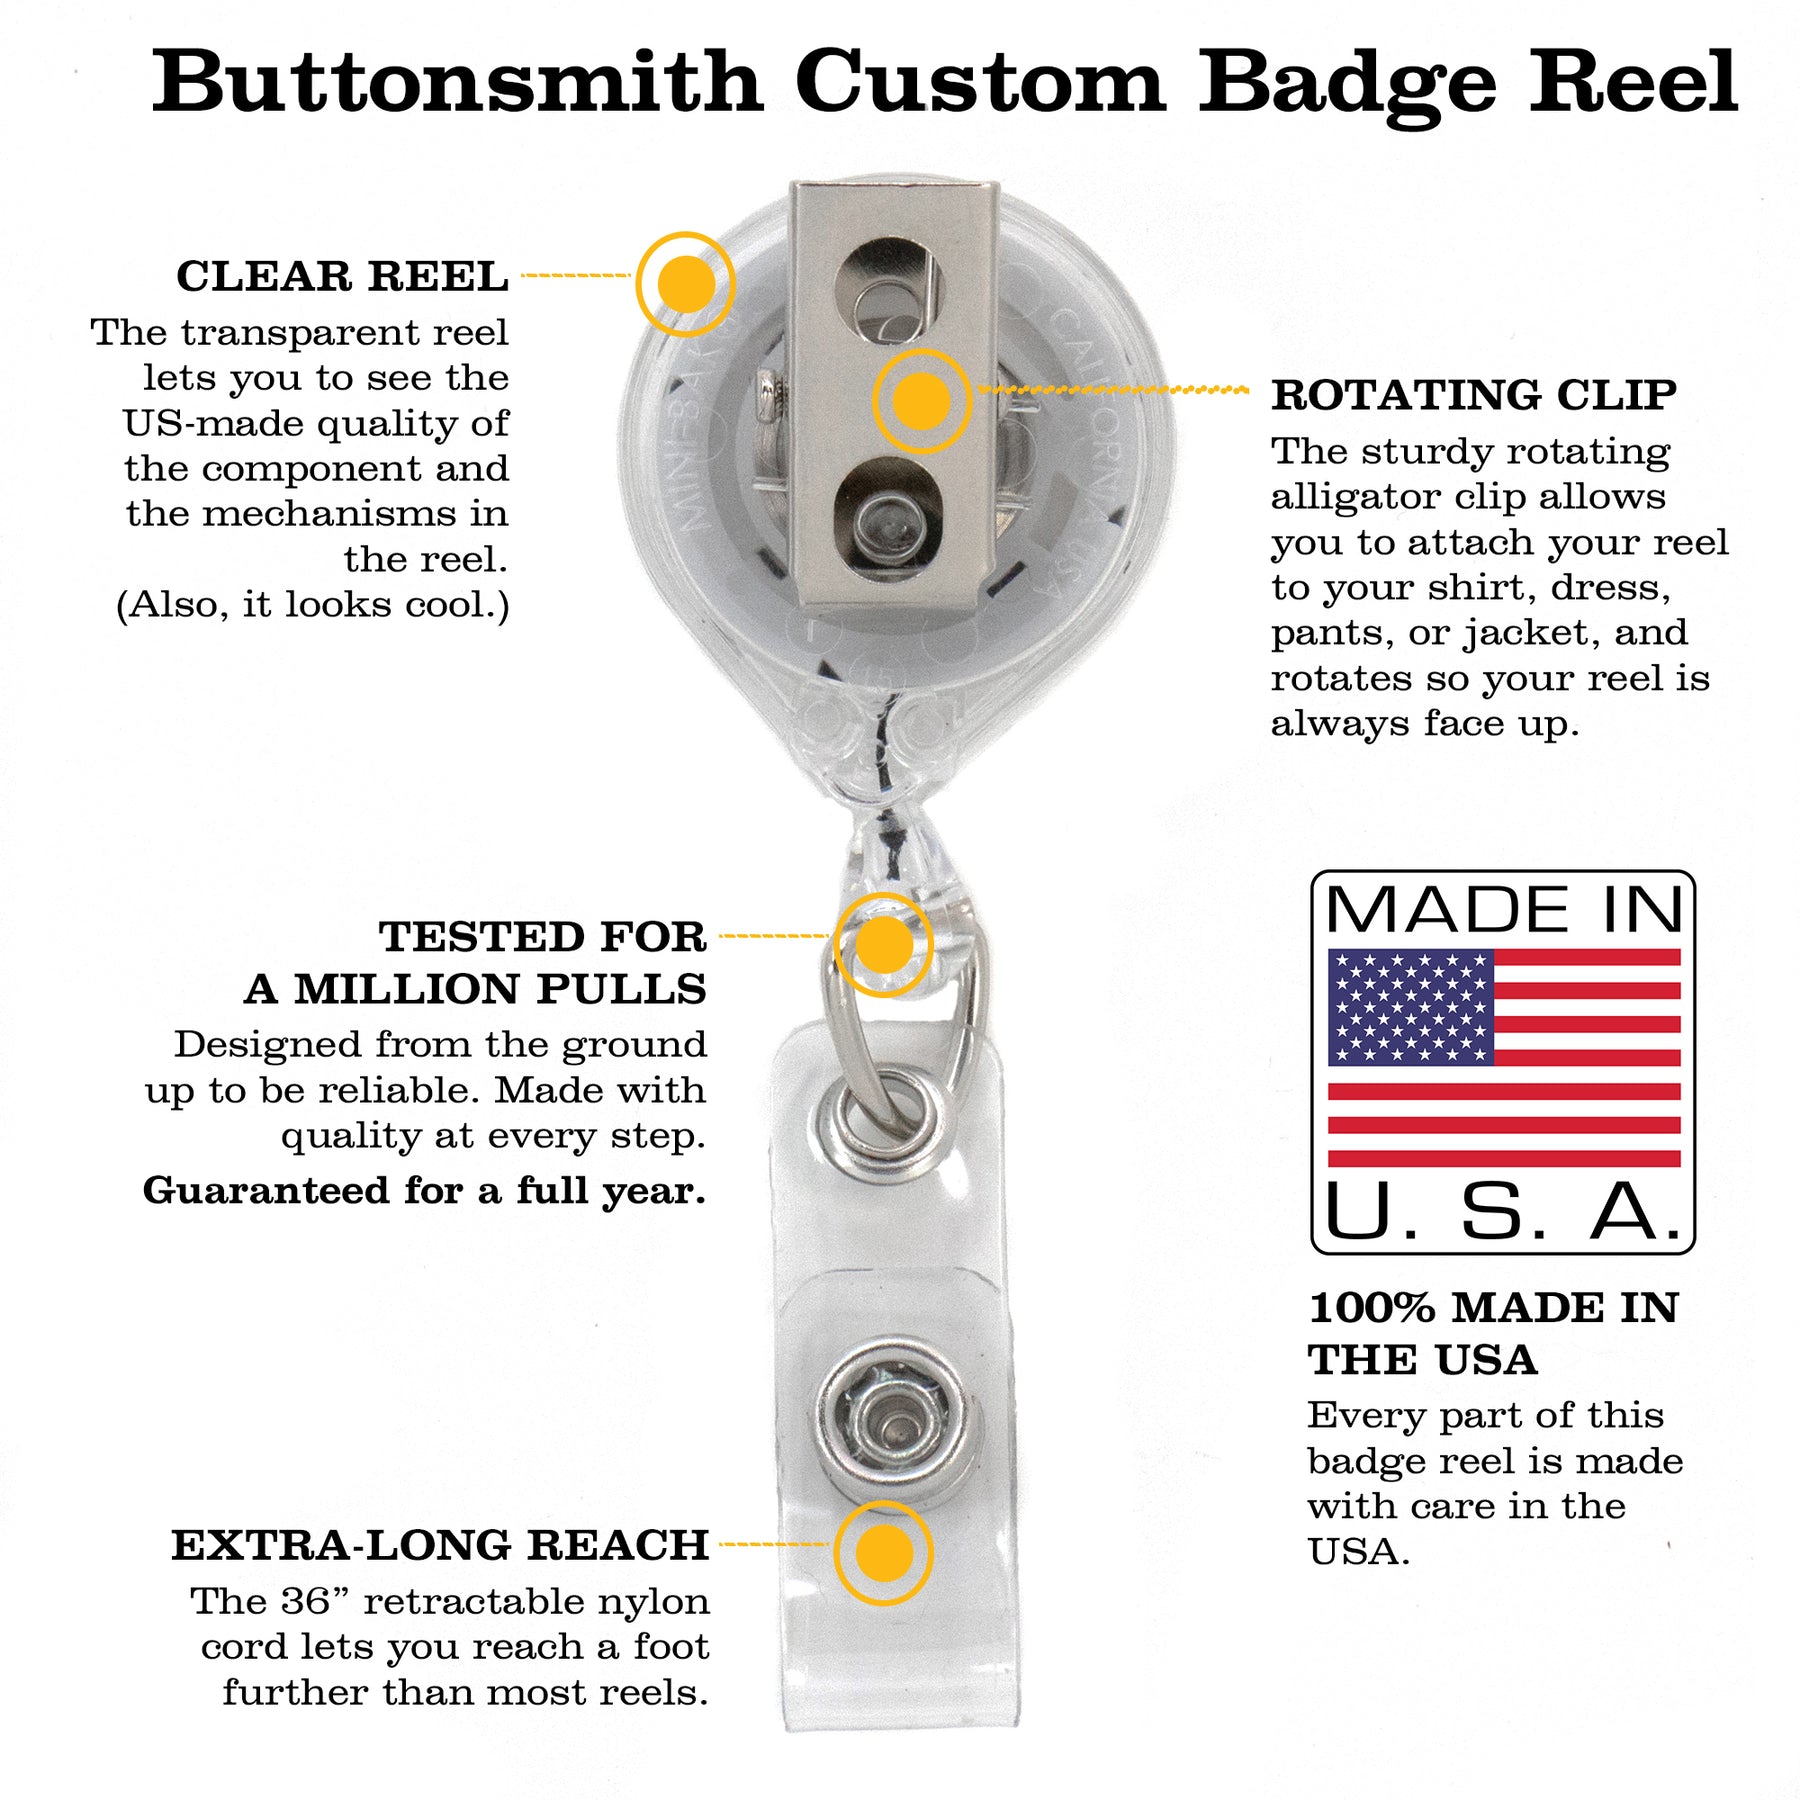 Buttonsmith Vangogh Iris Tinker Reel Retractable Badge Reel - Made in The USA Swappable Top Badge Reel with Belt Clip Back / Vangogh Iris